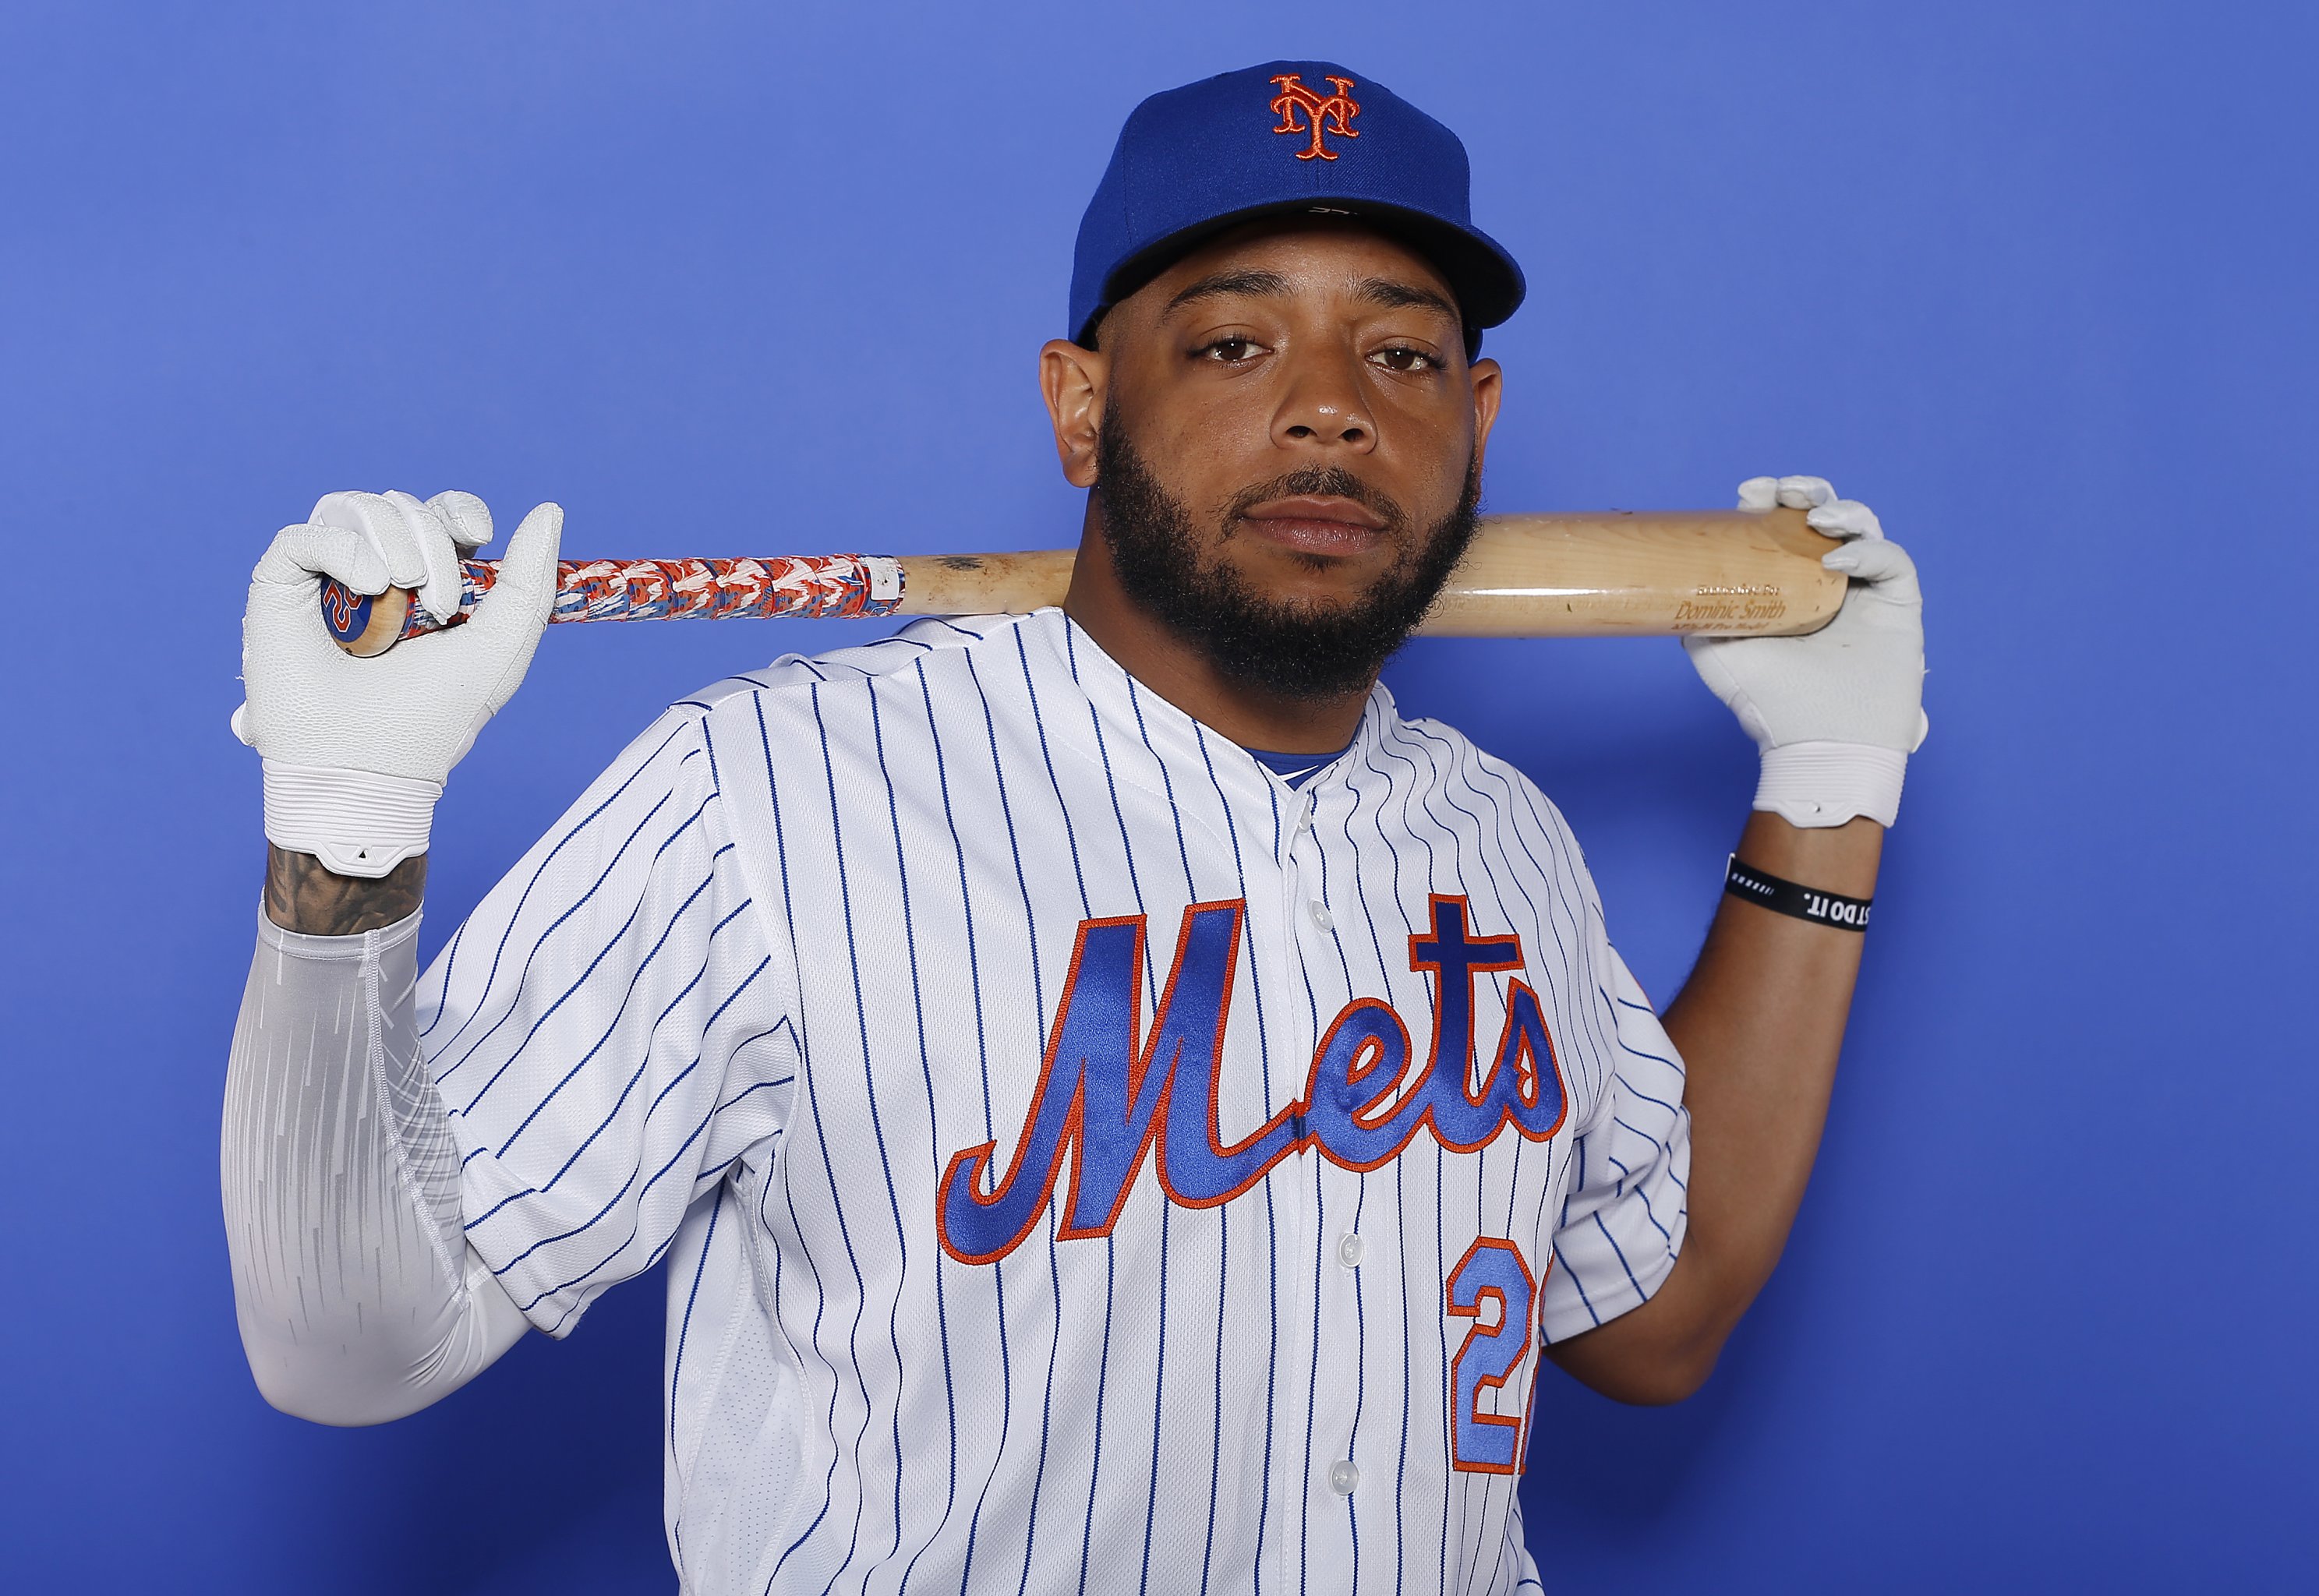 Mets News: Mets call up Adeiny Hechavarria, option Dominic Smith